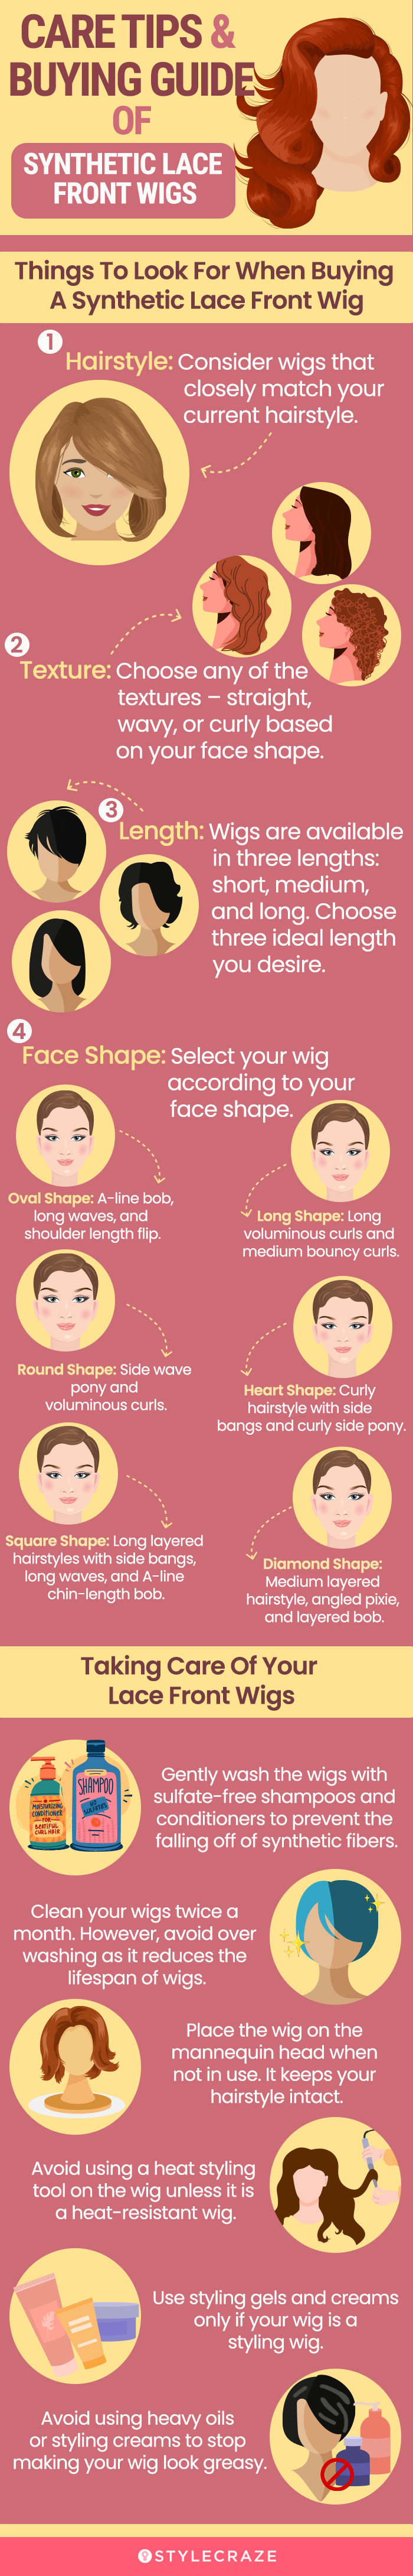 Care Tips & Buying Guide Of Synthetic Lace Front Wigs